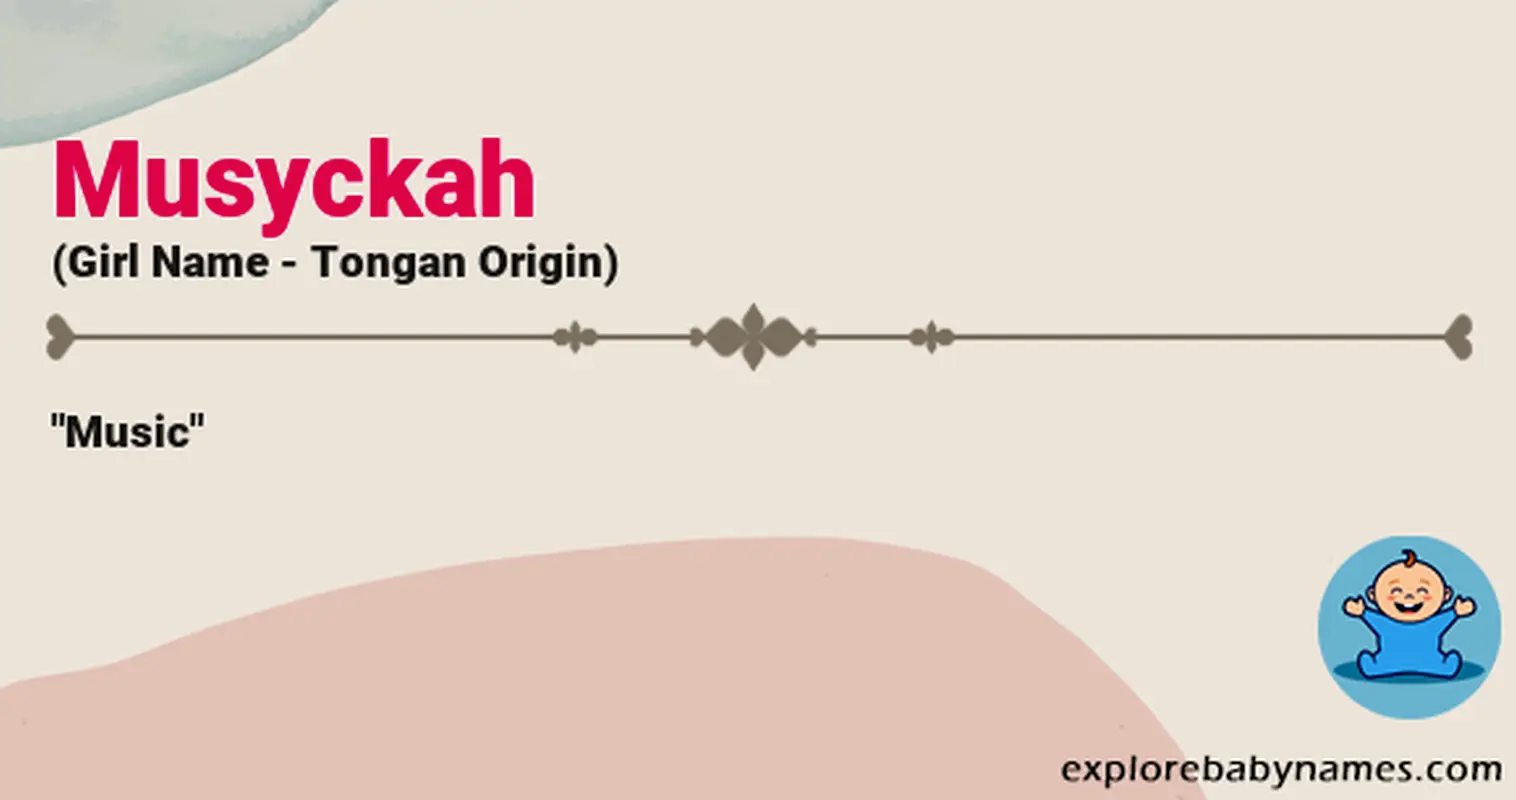 Meaning of Musyckah